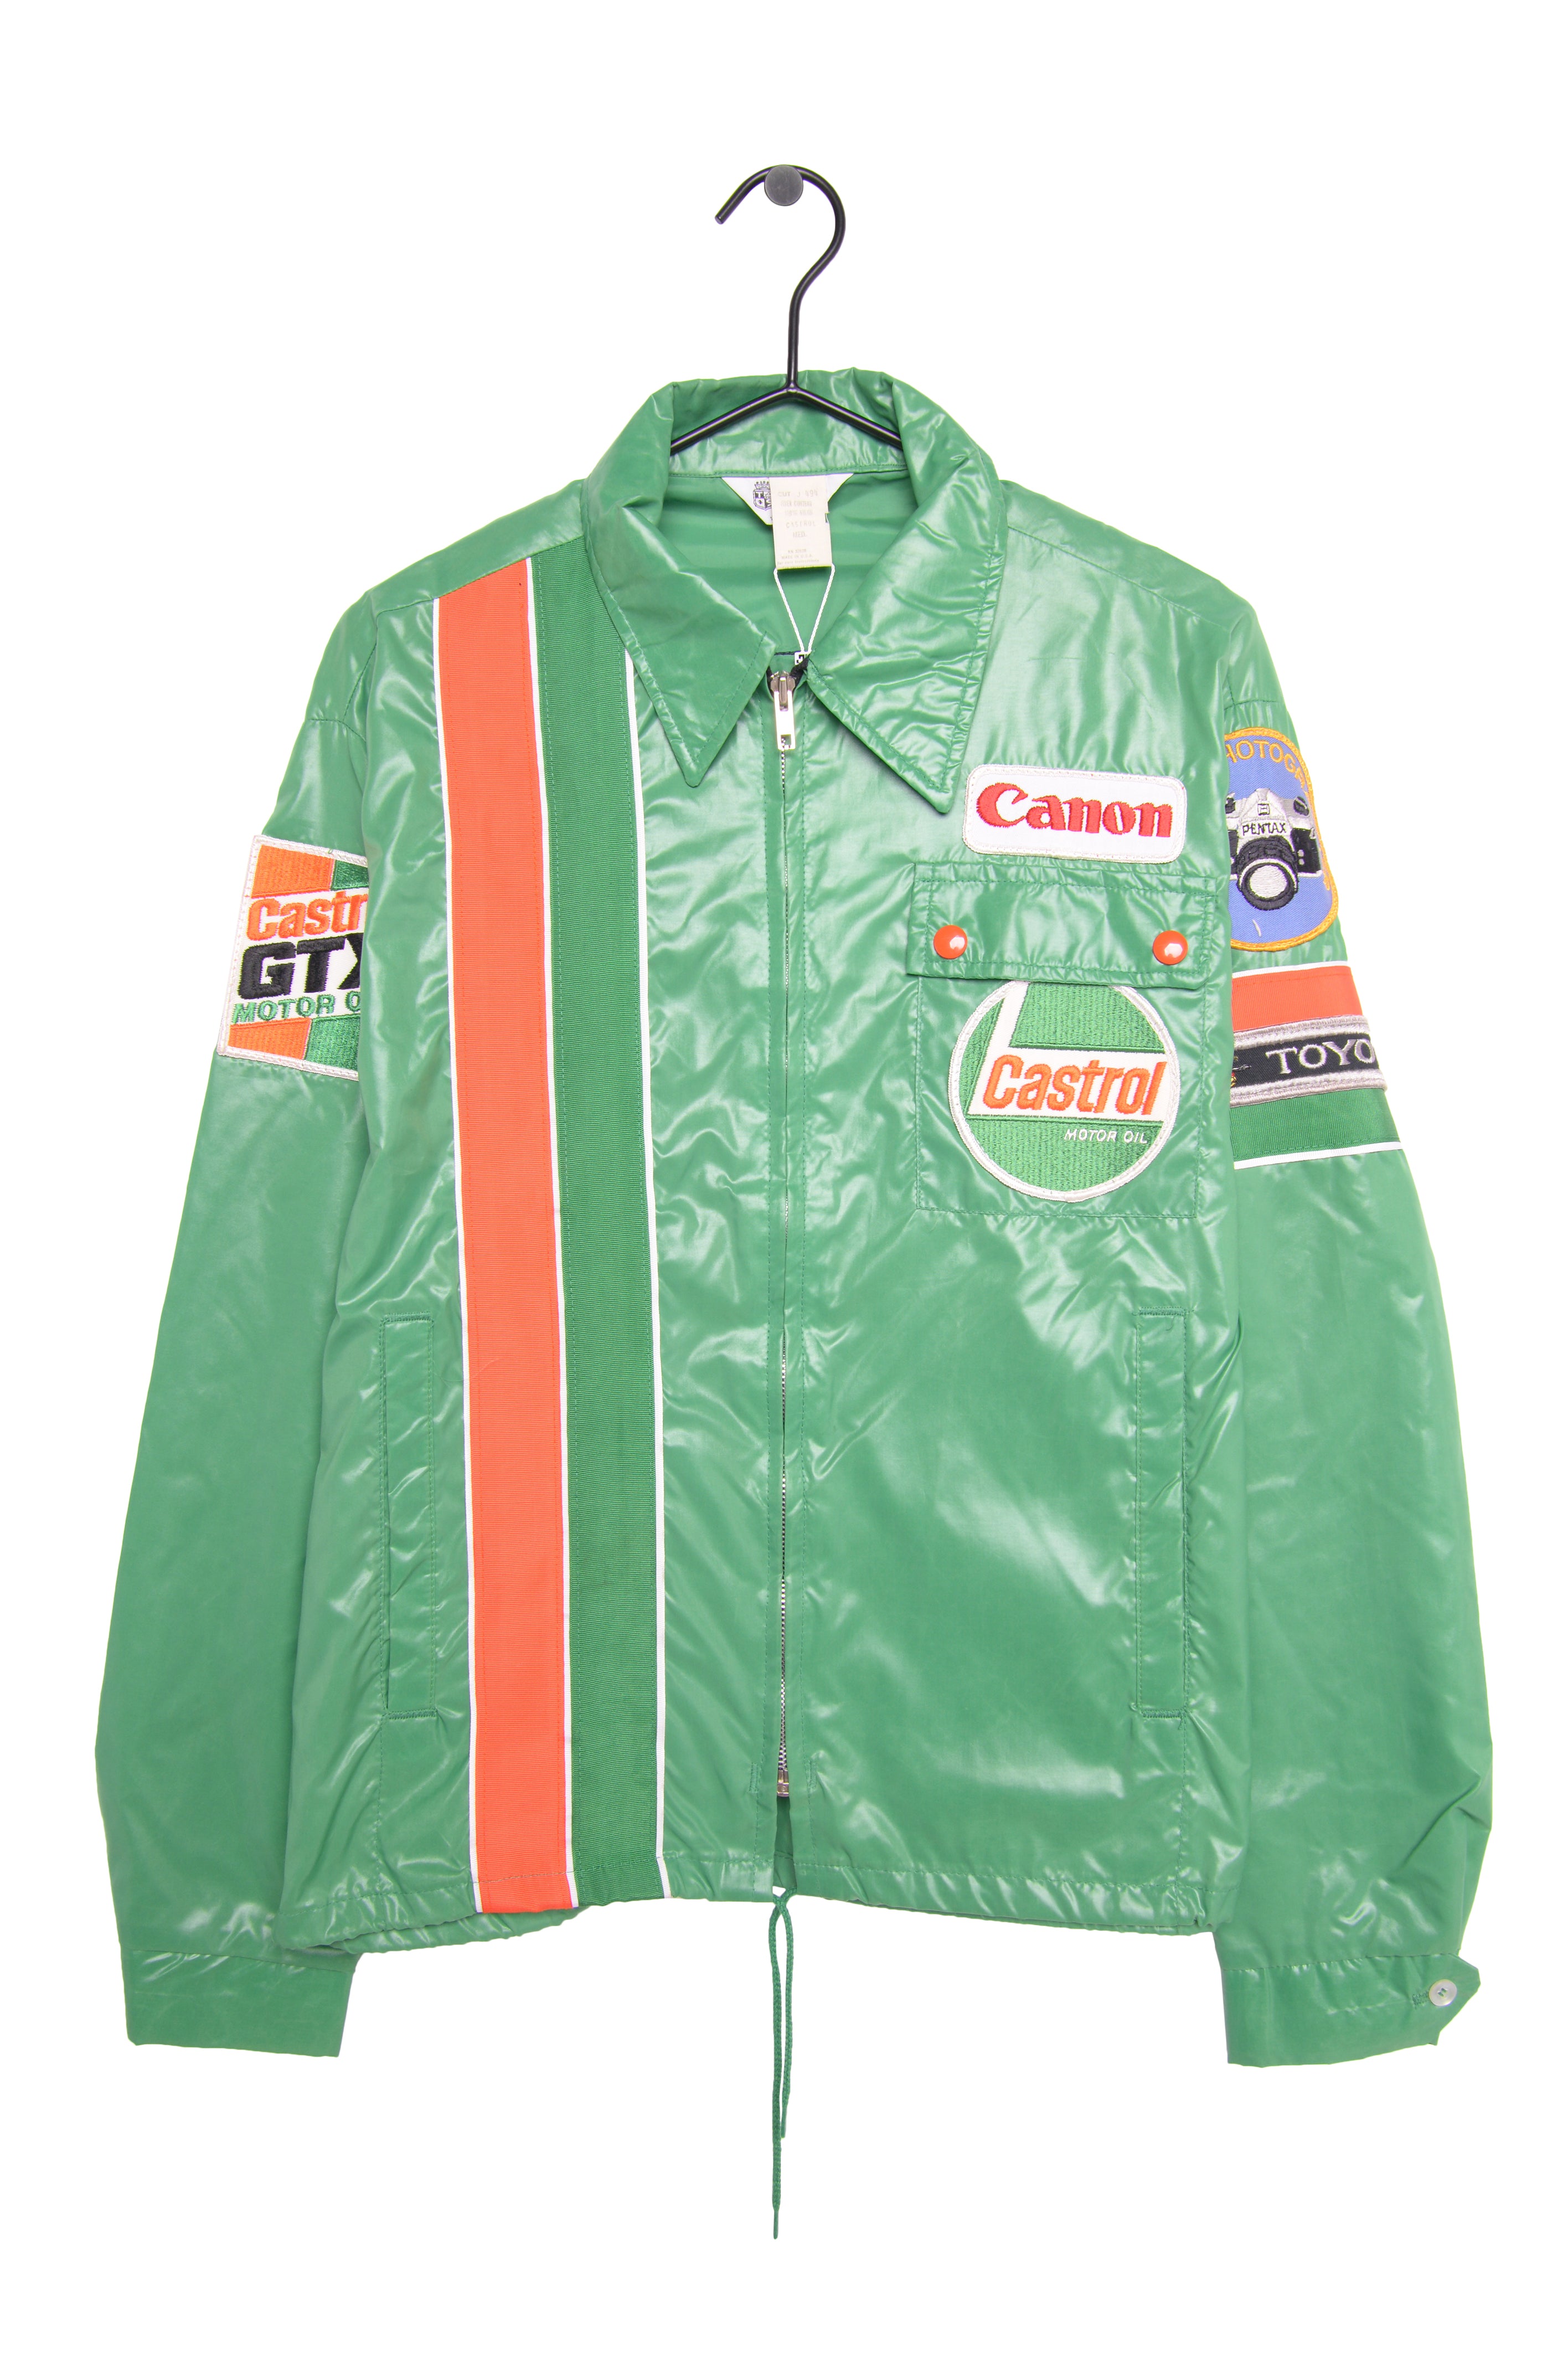 1970s Castrol GTX Racing Jacket USA Free Shipping - The Vintage